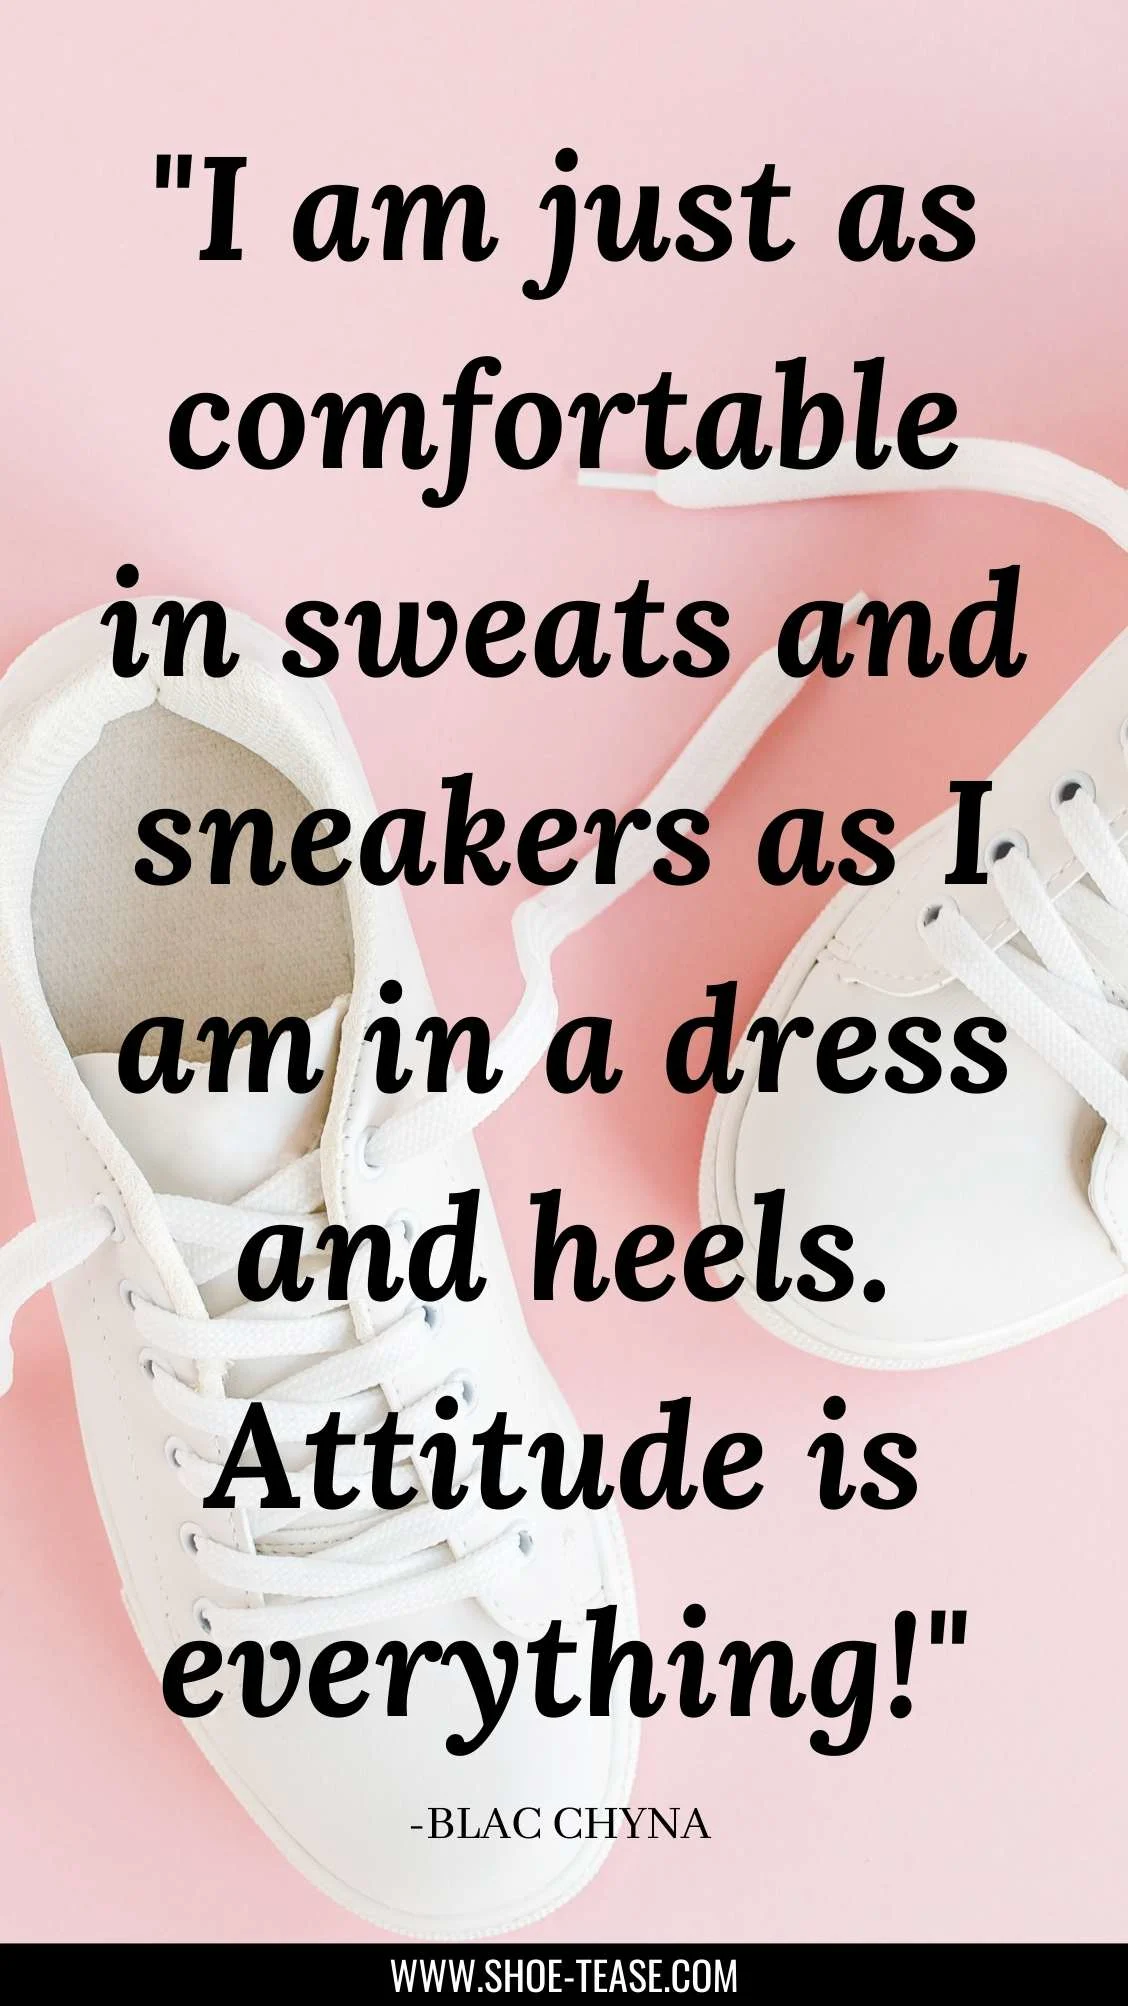 Sneakers Quote by Blac Chyna reading I am just as comfortable in sweats and sneakers as I am in a dress and heels over image of a white pair of sneakers.